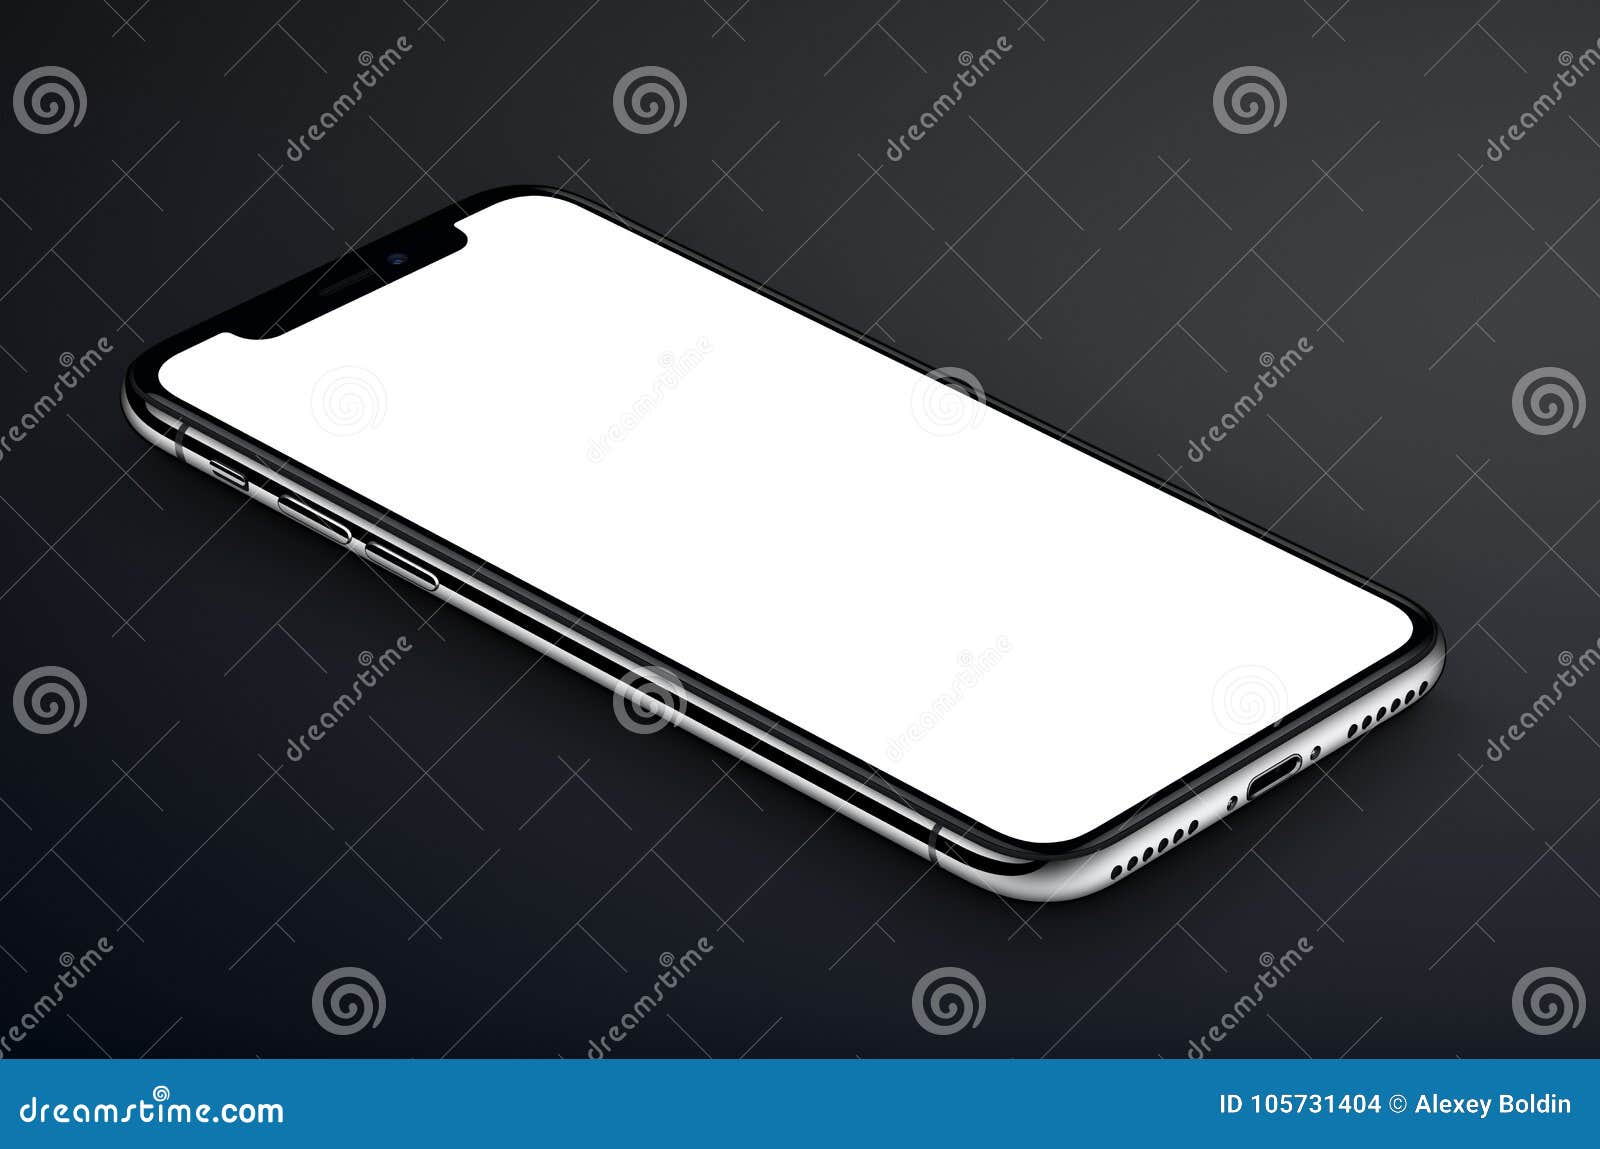 Perspective View Isometric Black Smartphone Similar To IPhone X Mockup ...